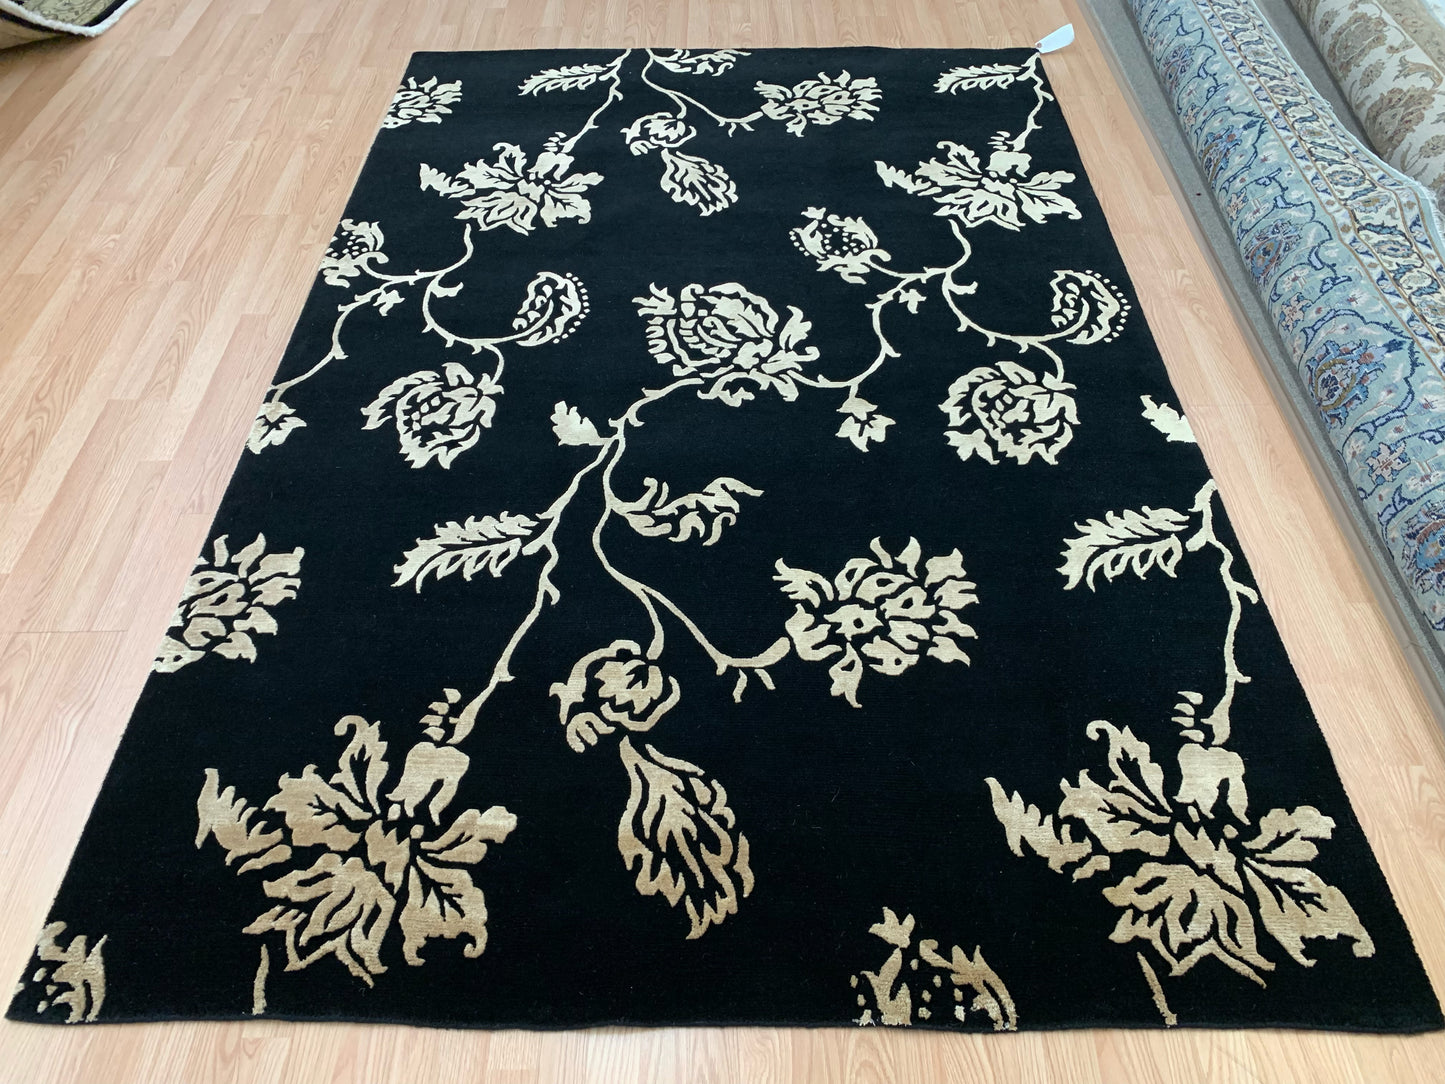 Hand-Knotted Wool and Silk Black/Gold Floral Rug (6'x9')